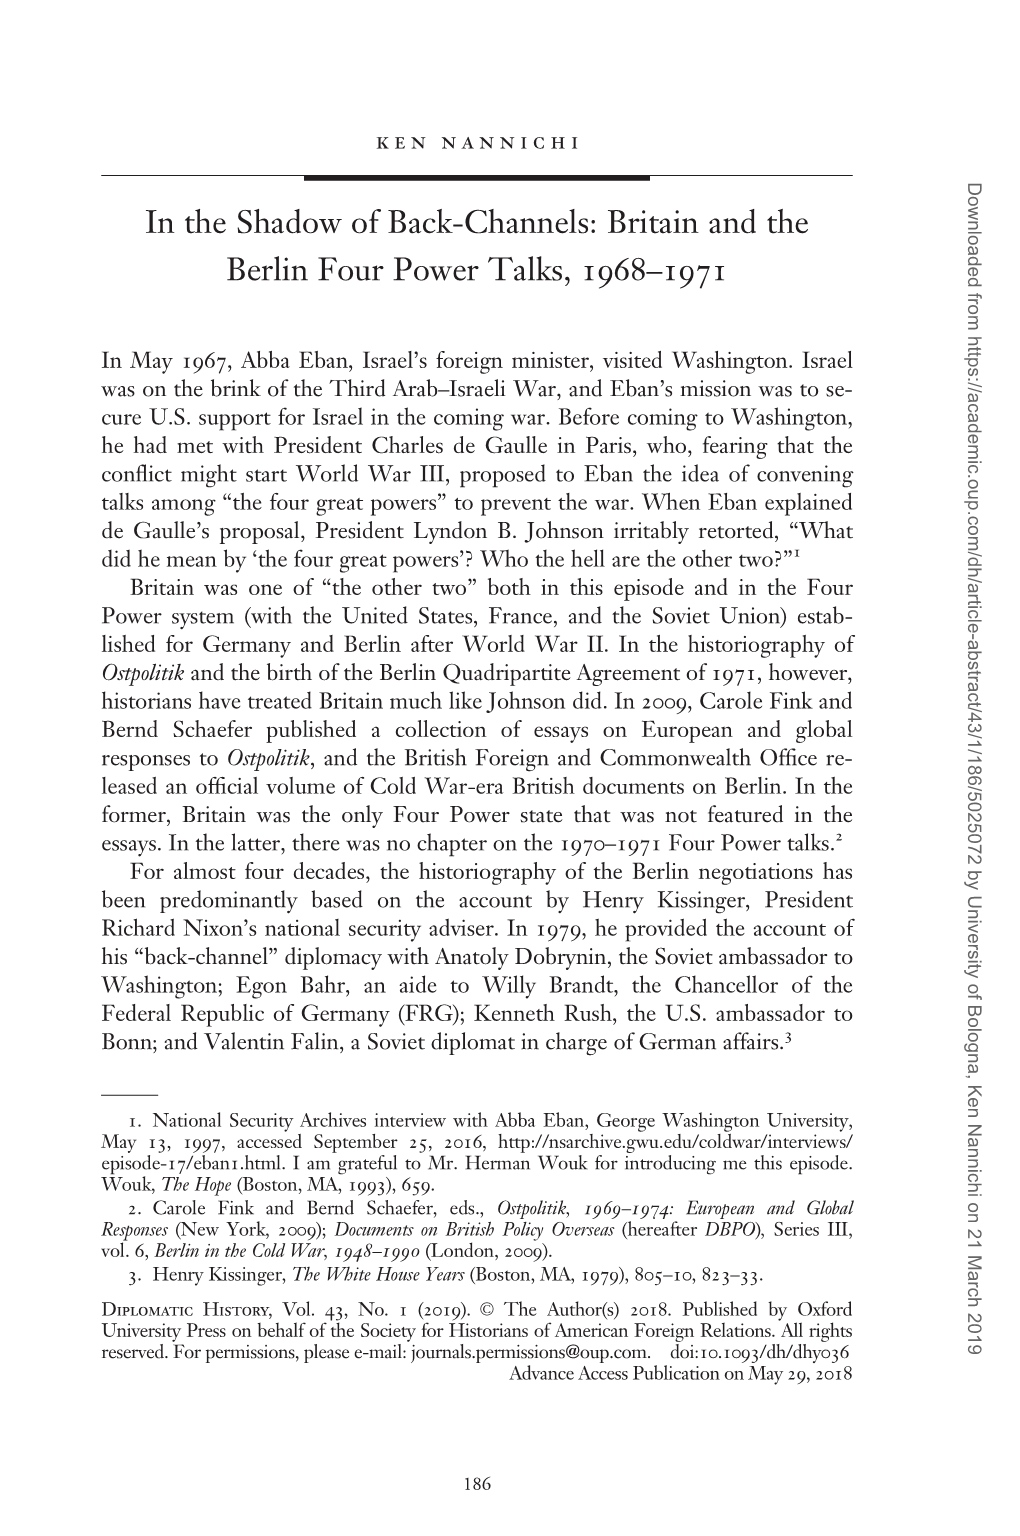 In the Shadow of Back-Channels: Britain and the Berlin Four Power Talks, 1968–1971